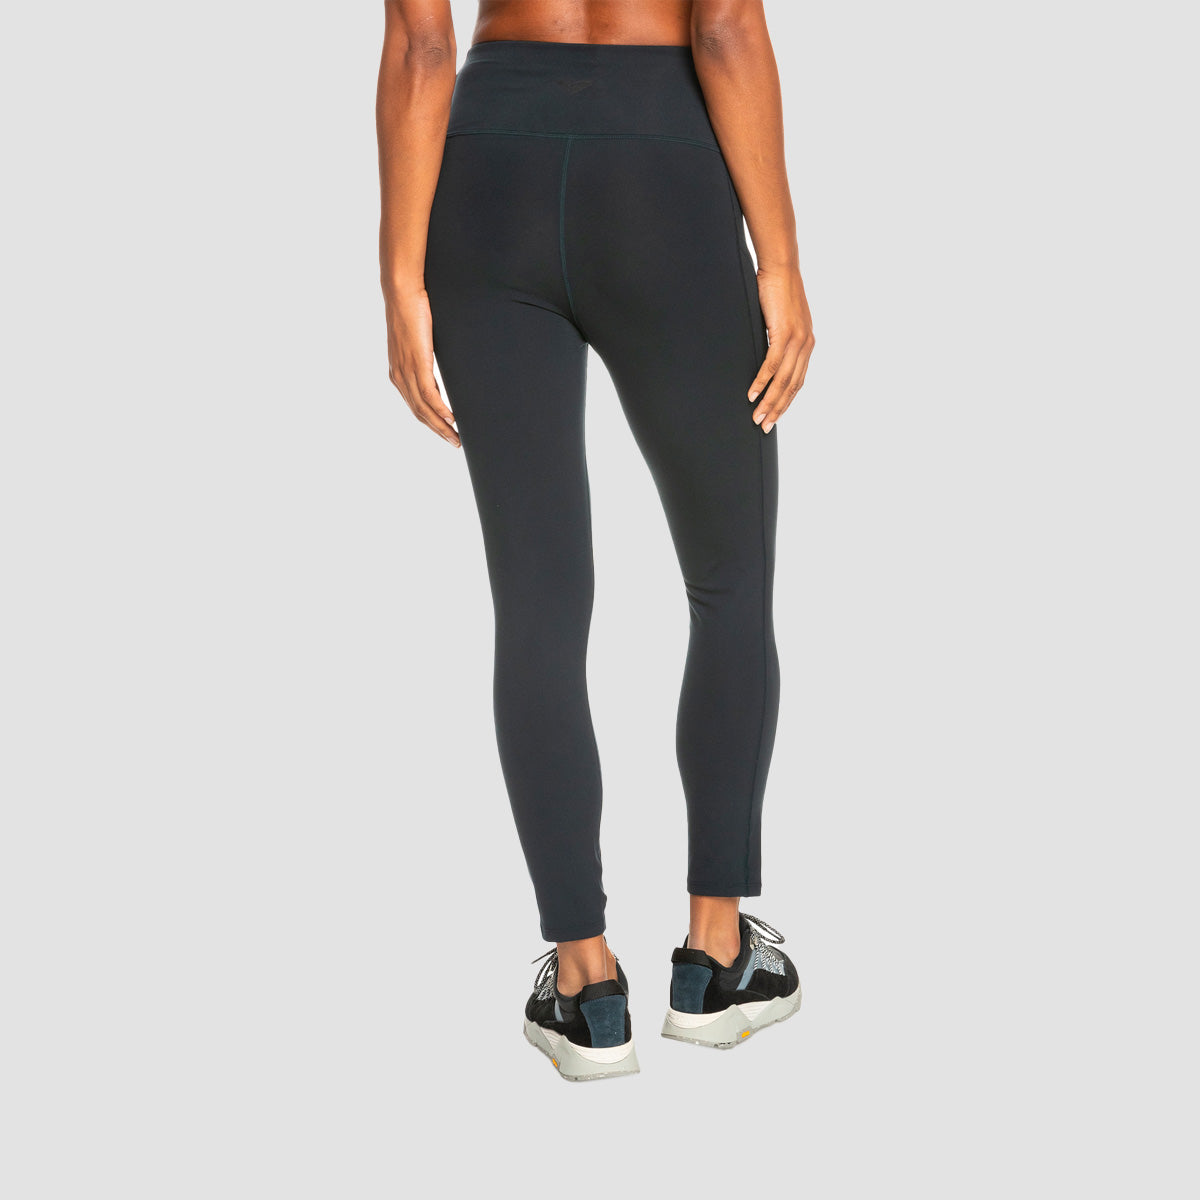 Roxy Heart Into It Ankle Sports Leggings Anthracite - Womens